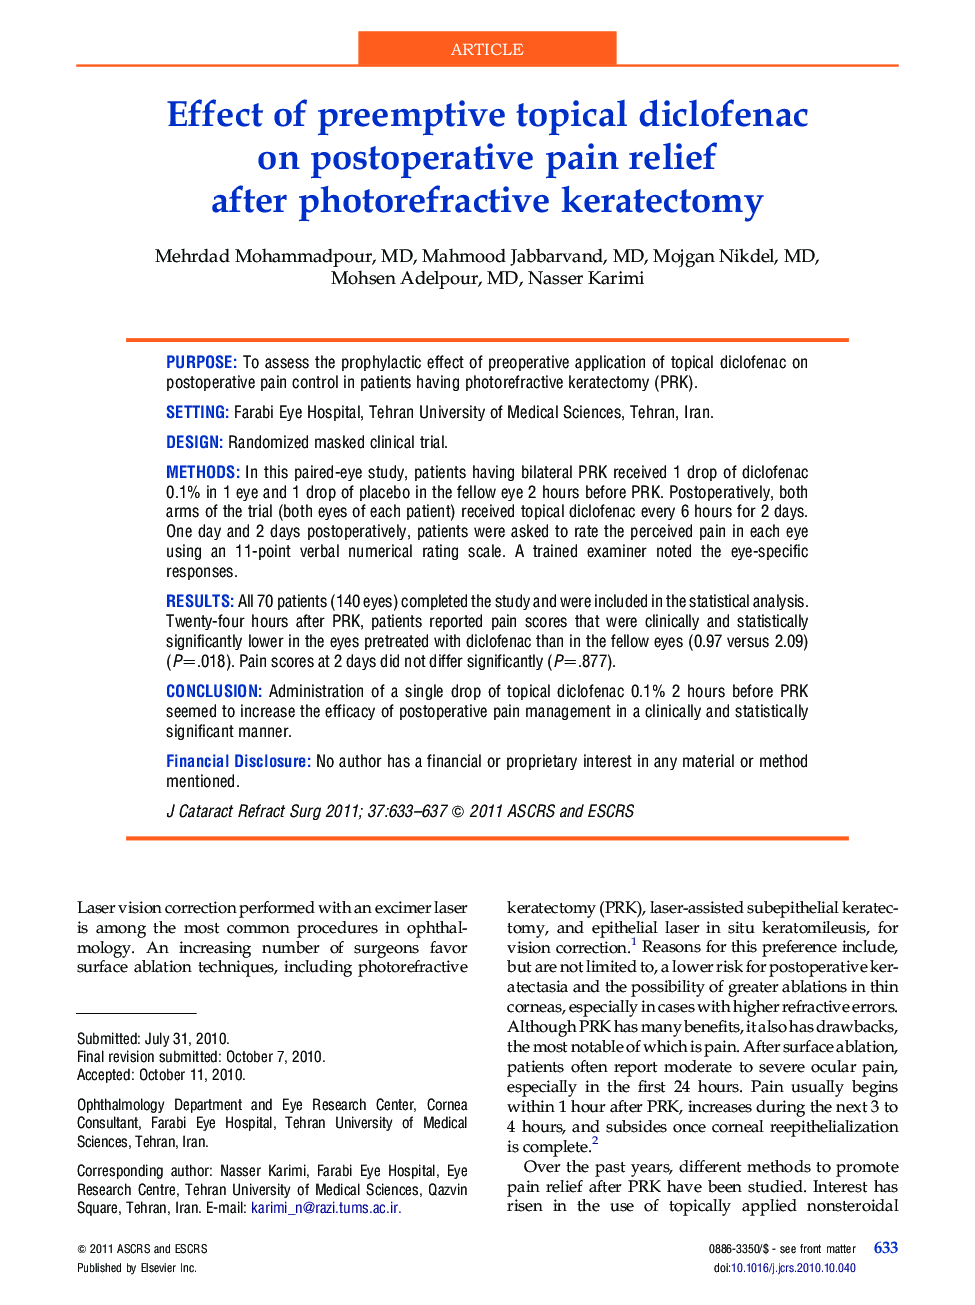 Effect of preemptive topical diclofenac on postoperative pain relief after photorefractive keratectomy